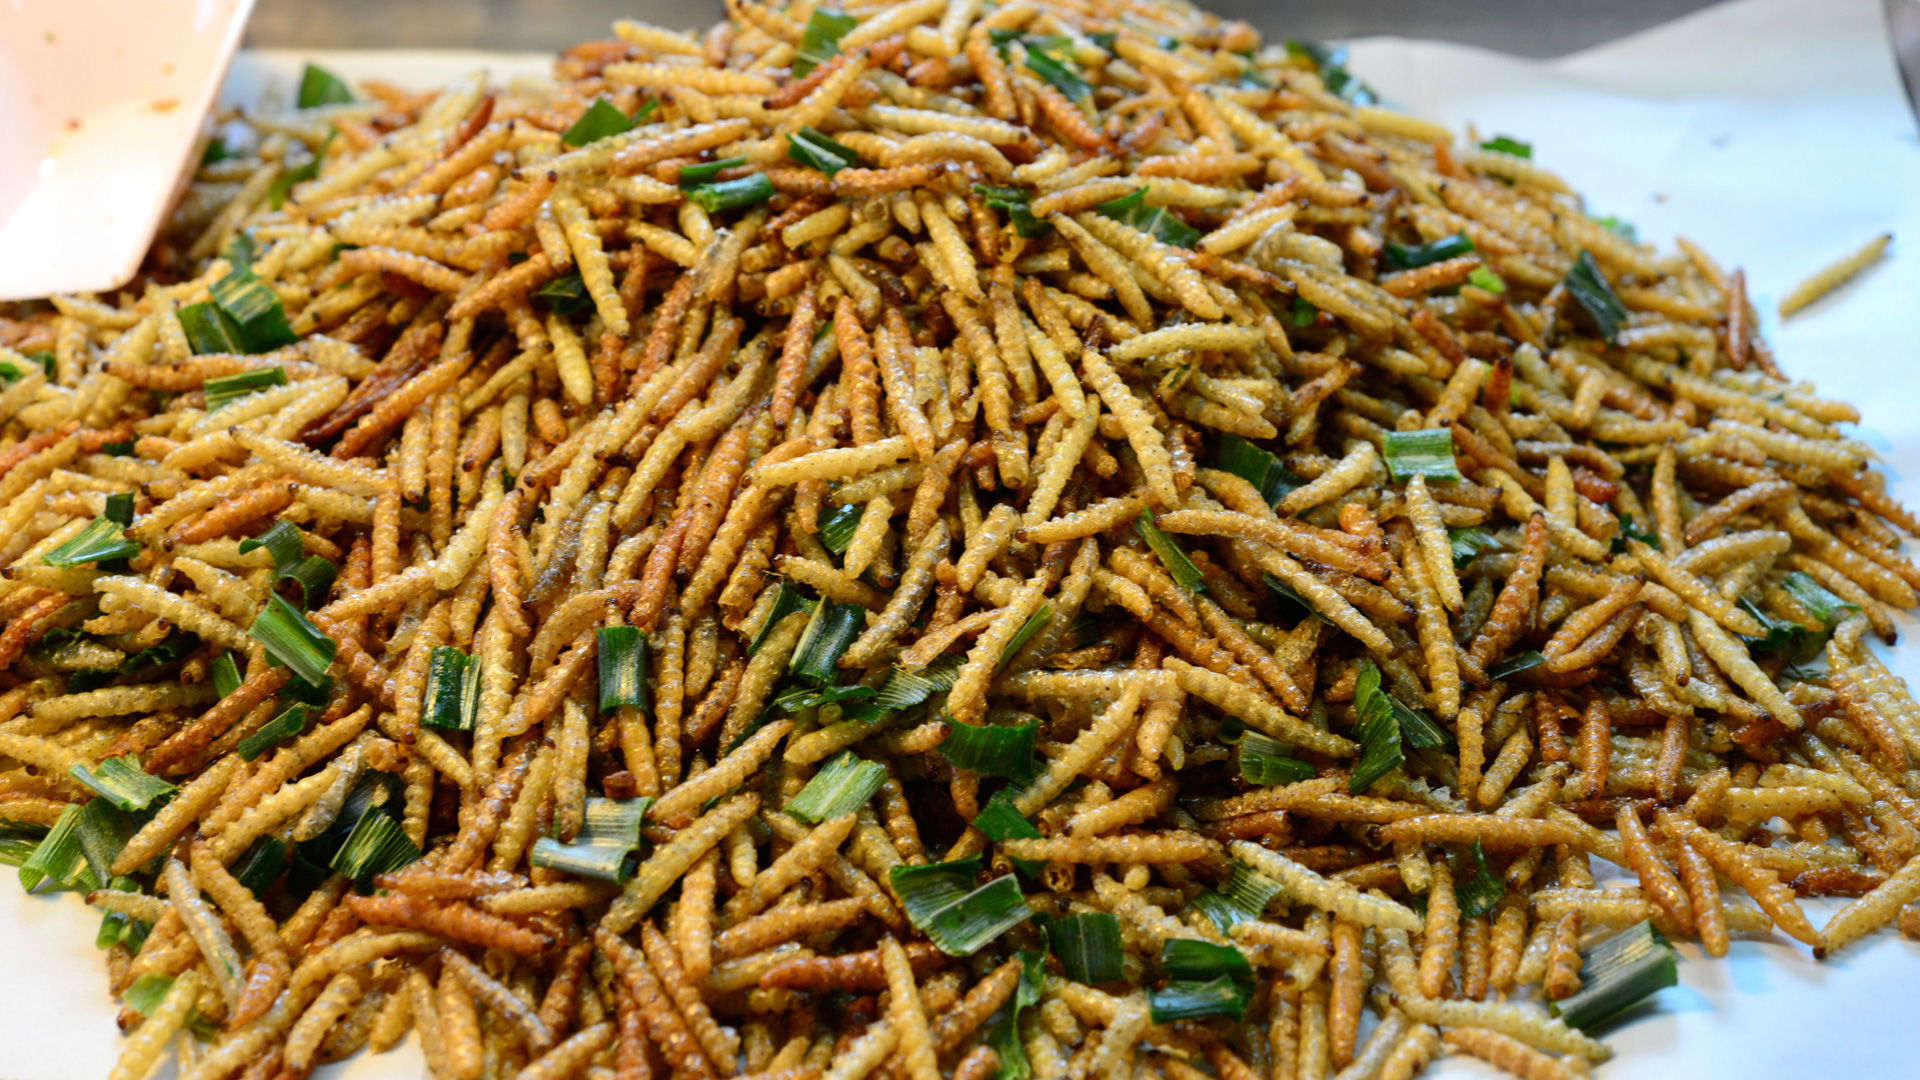 Swedish Govt Spends Millions Telling Citizens To Eat Insect 